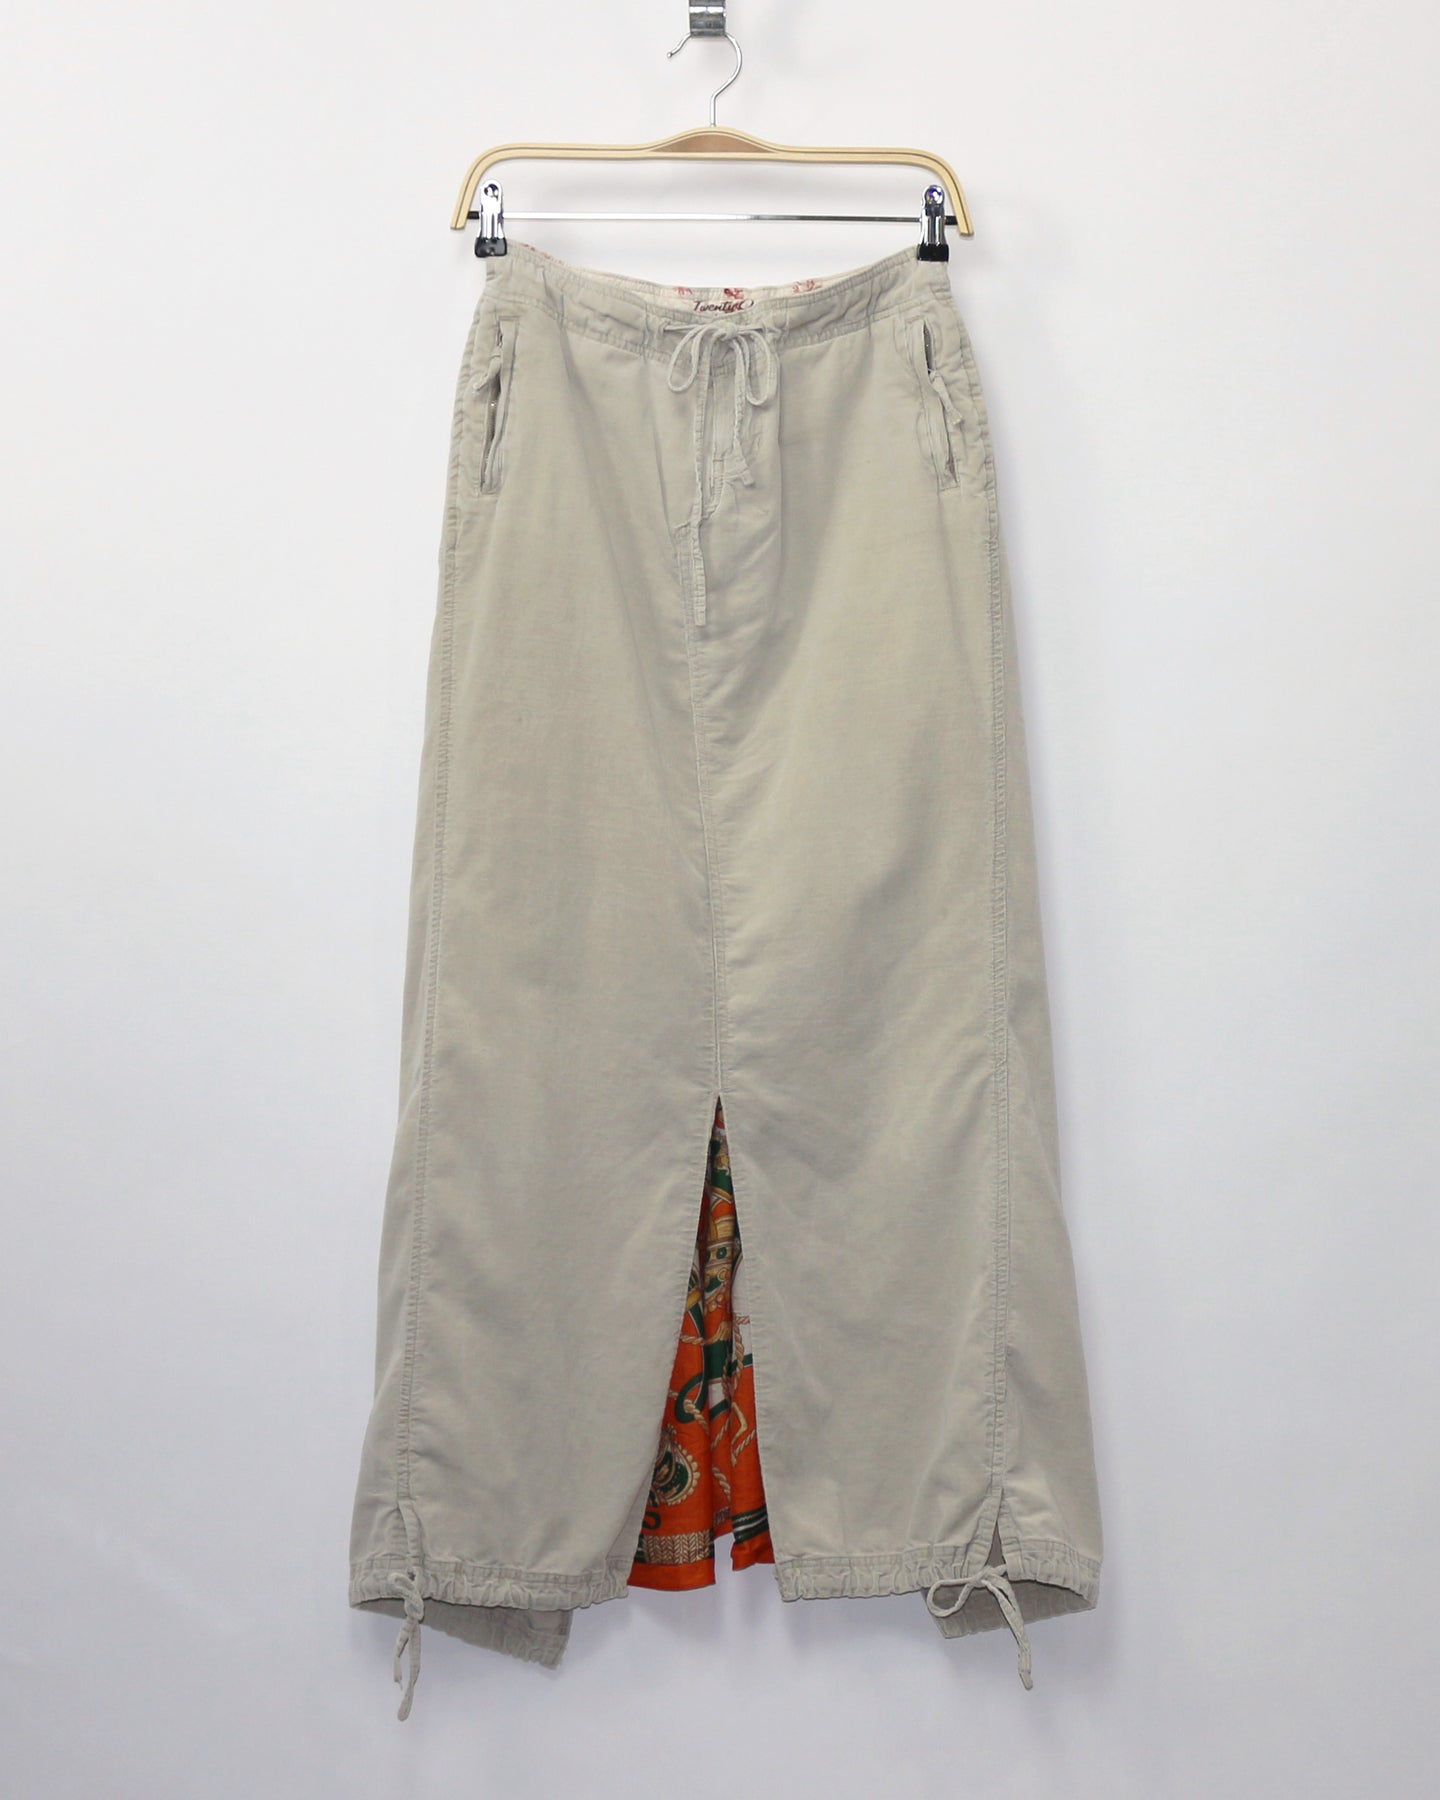 Corduroy Maxi Skirt with scarf inset, Waist 28